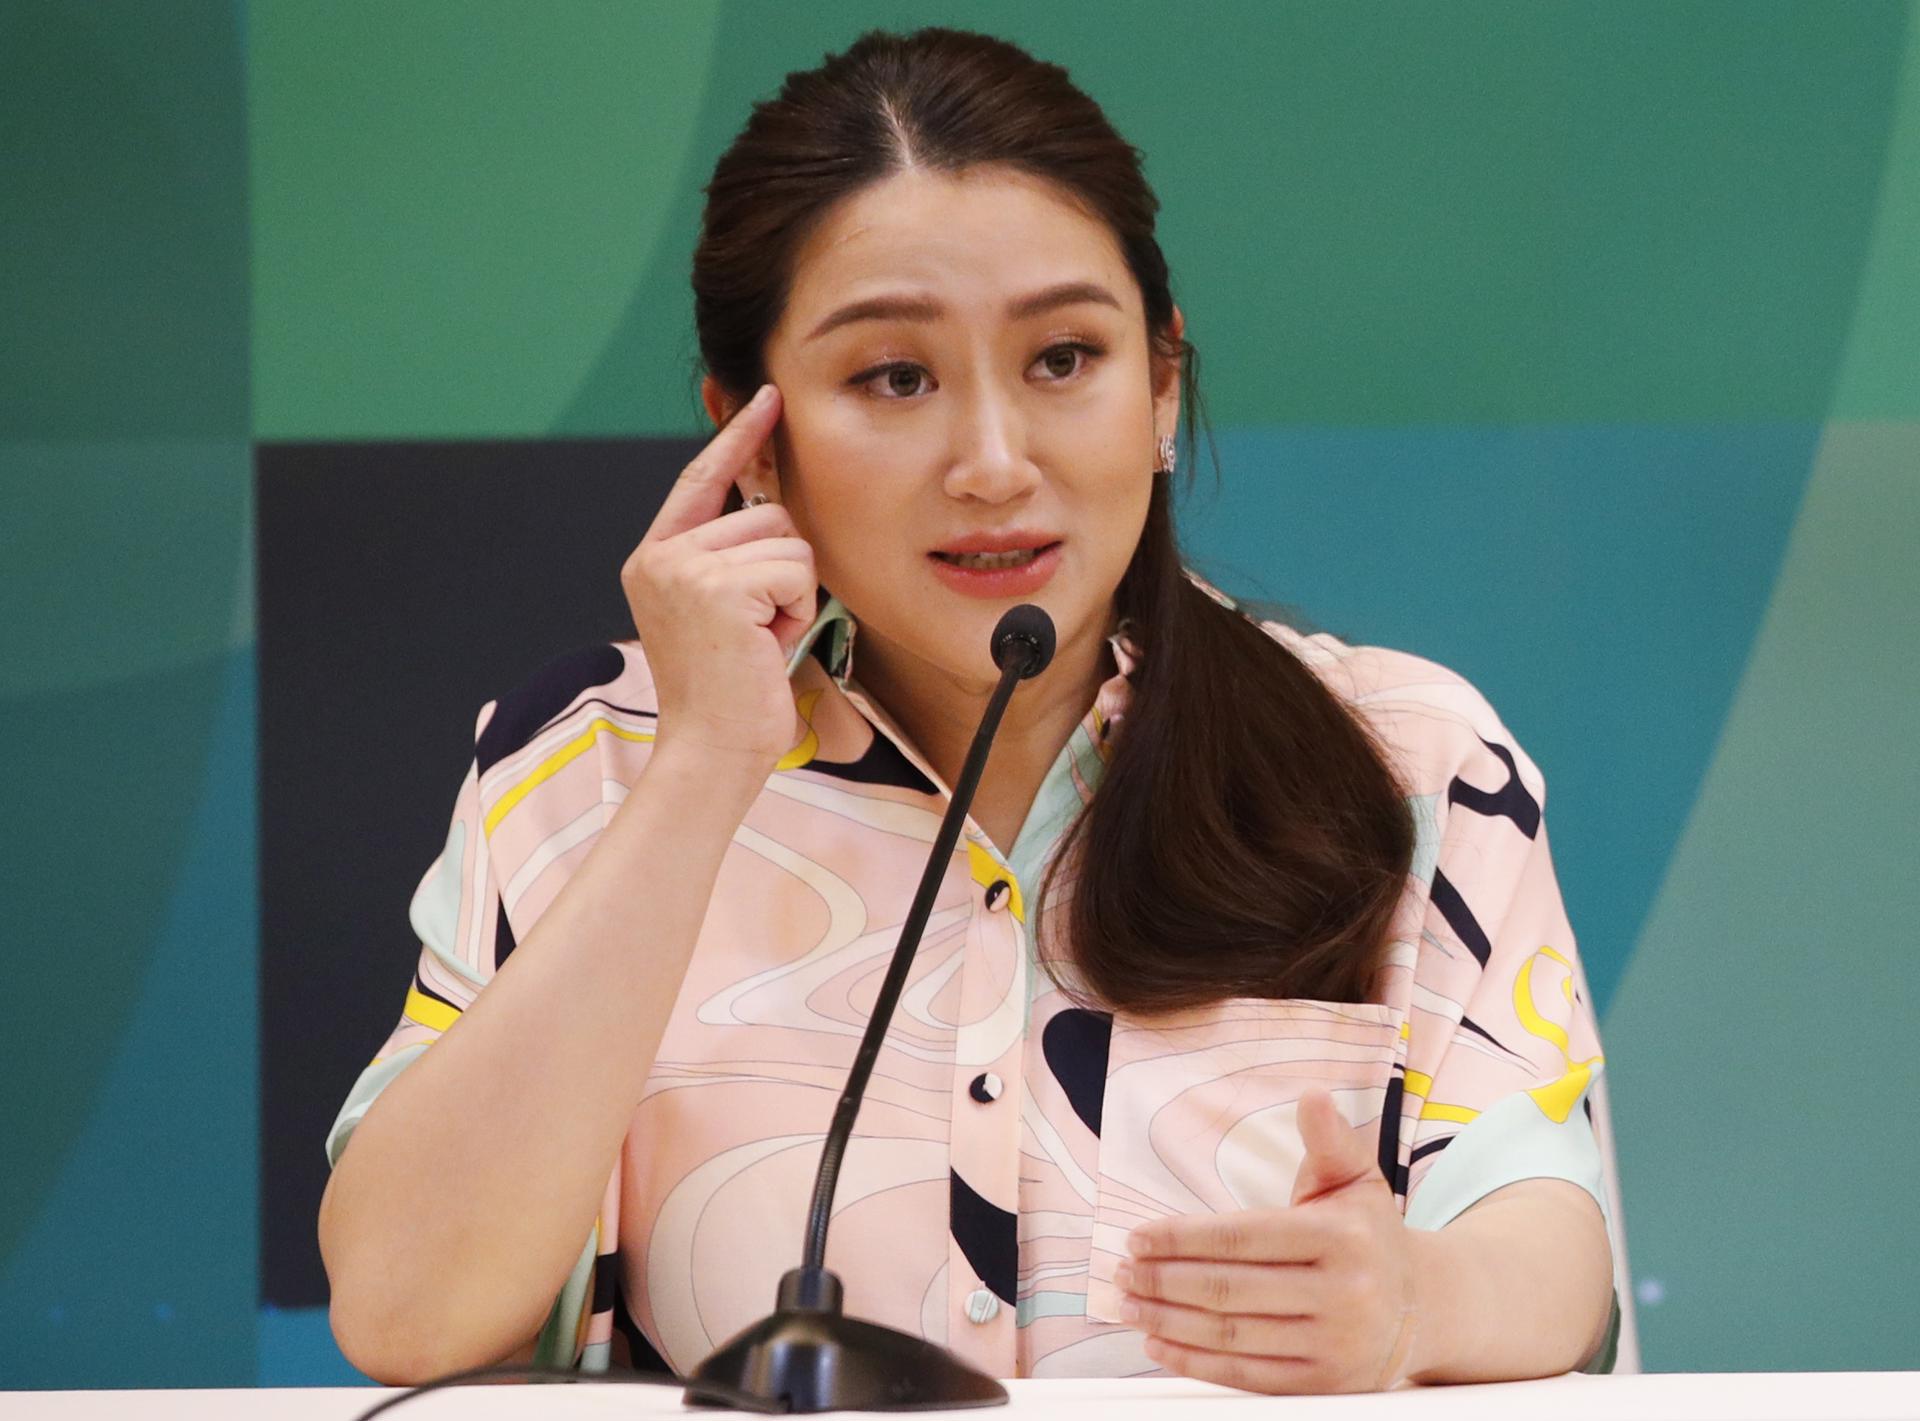 Pheu Thai Party's prime ministerial candidate Paetongtarn Shinawatra gives a press conference following her son's birth at a hospital in Bangkok, Thailand, 03 May 2023. EFE-EPA/RUNGROJ YONGRIT/FILE